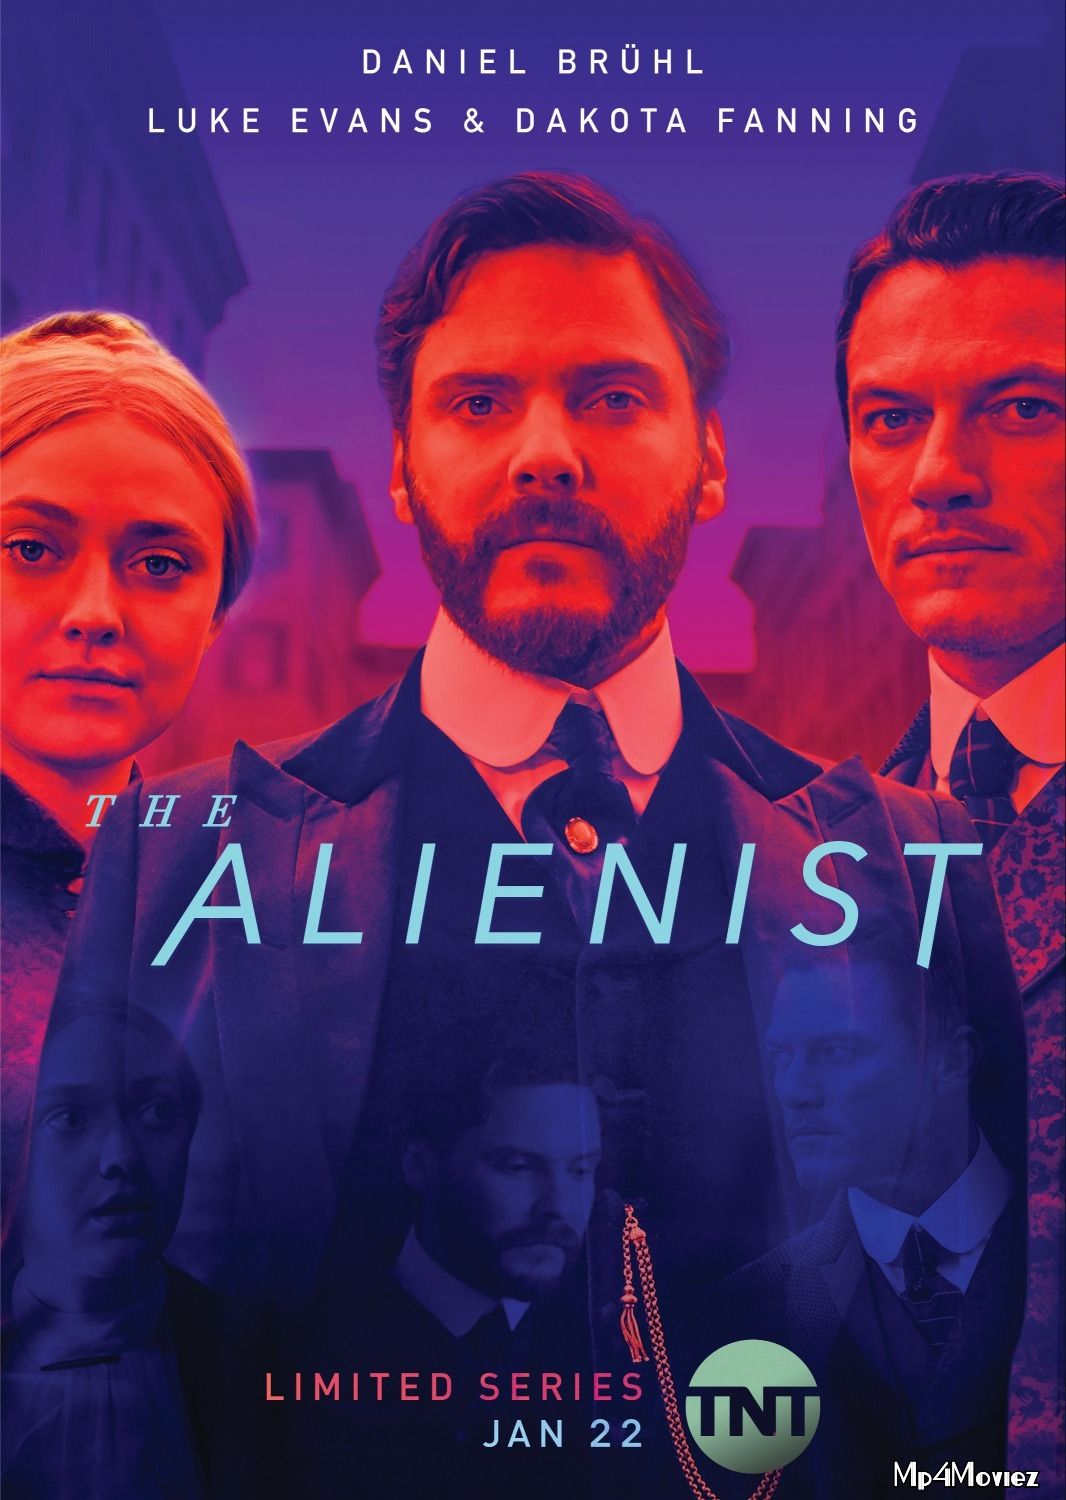 The Alienist S02 (2020) Hindi Dubbed Complete Netflix WebSeries download full movie